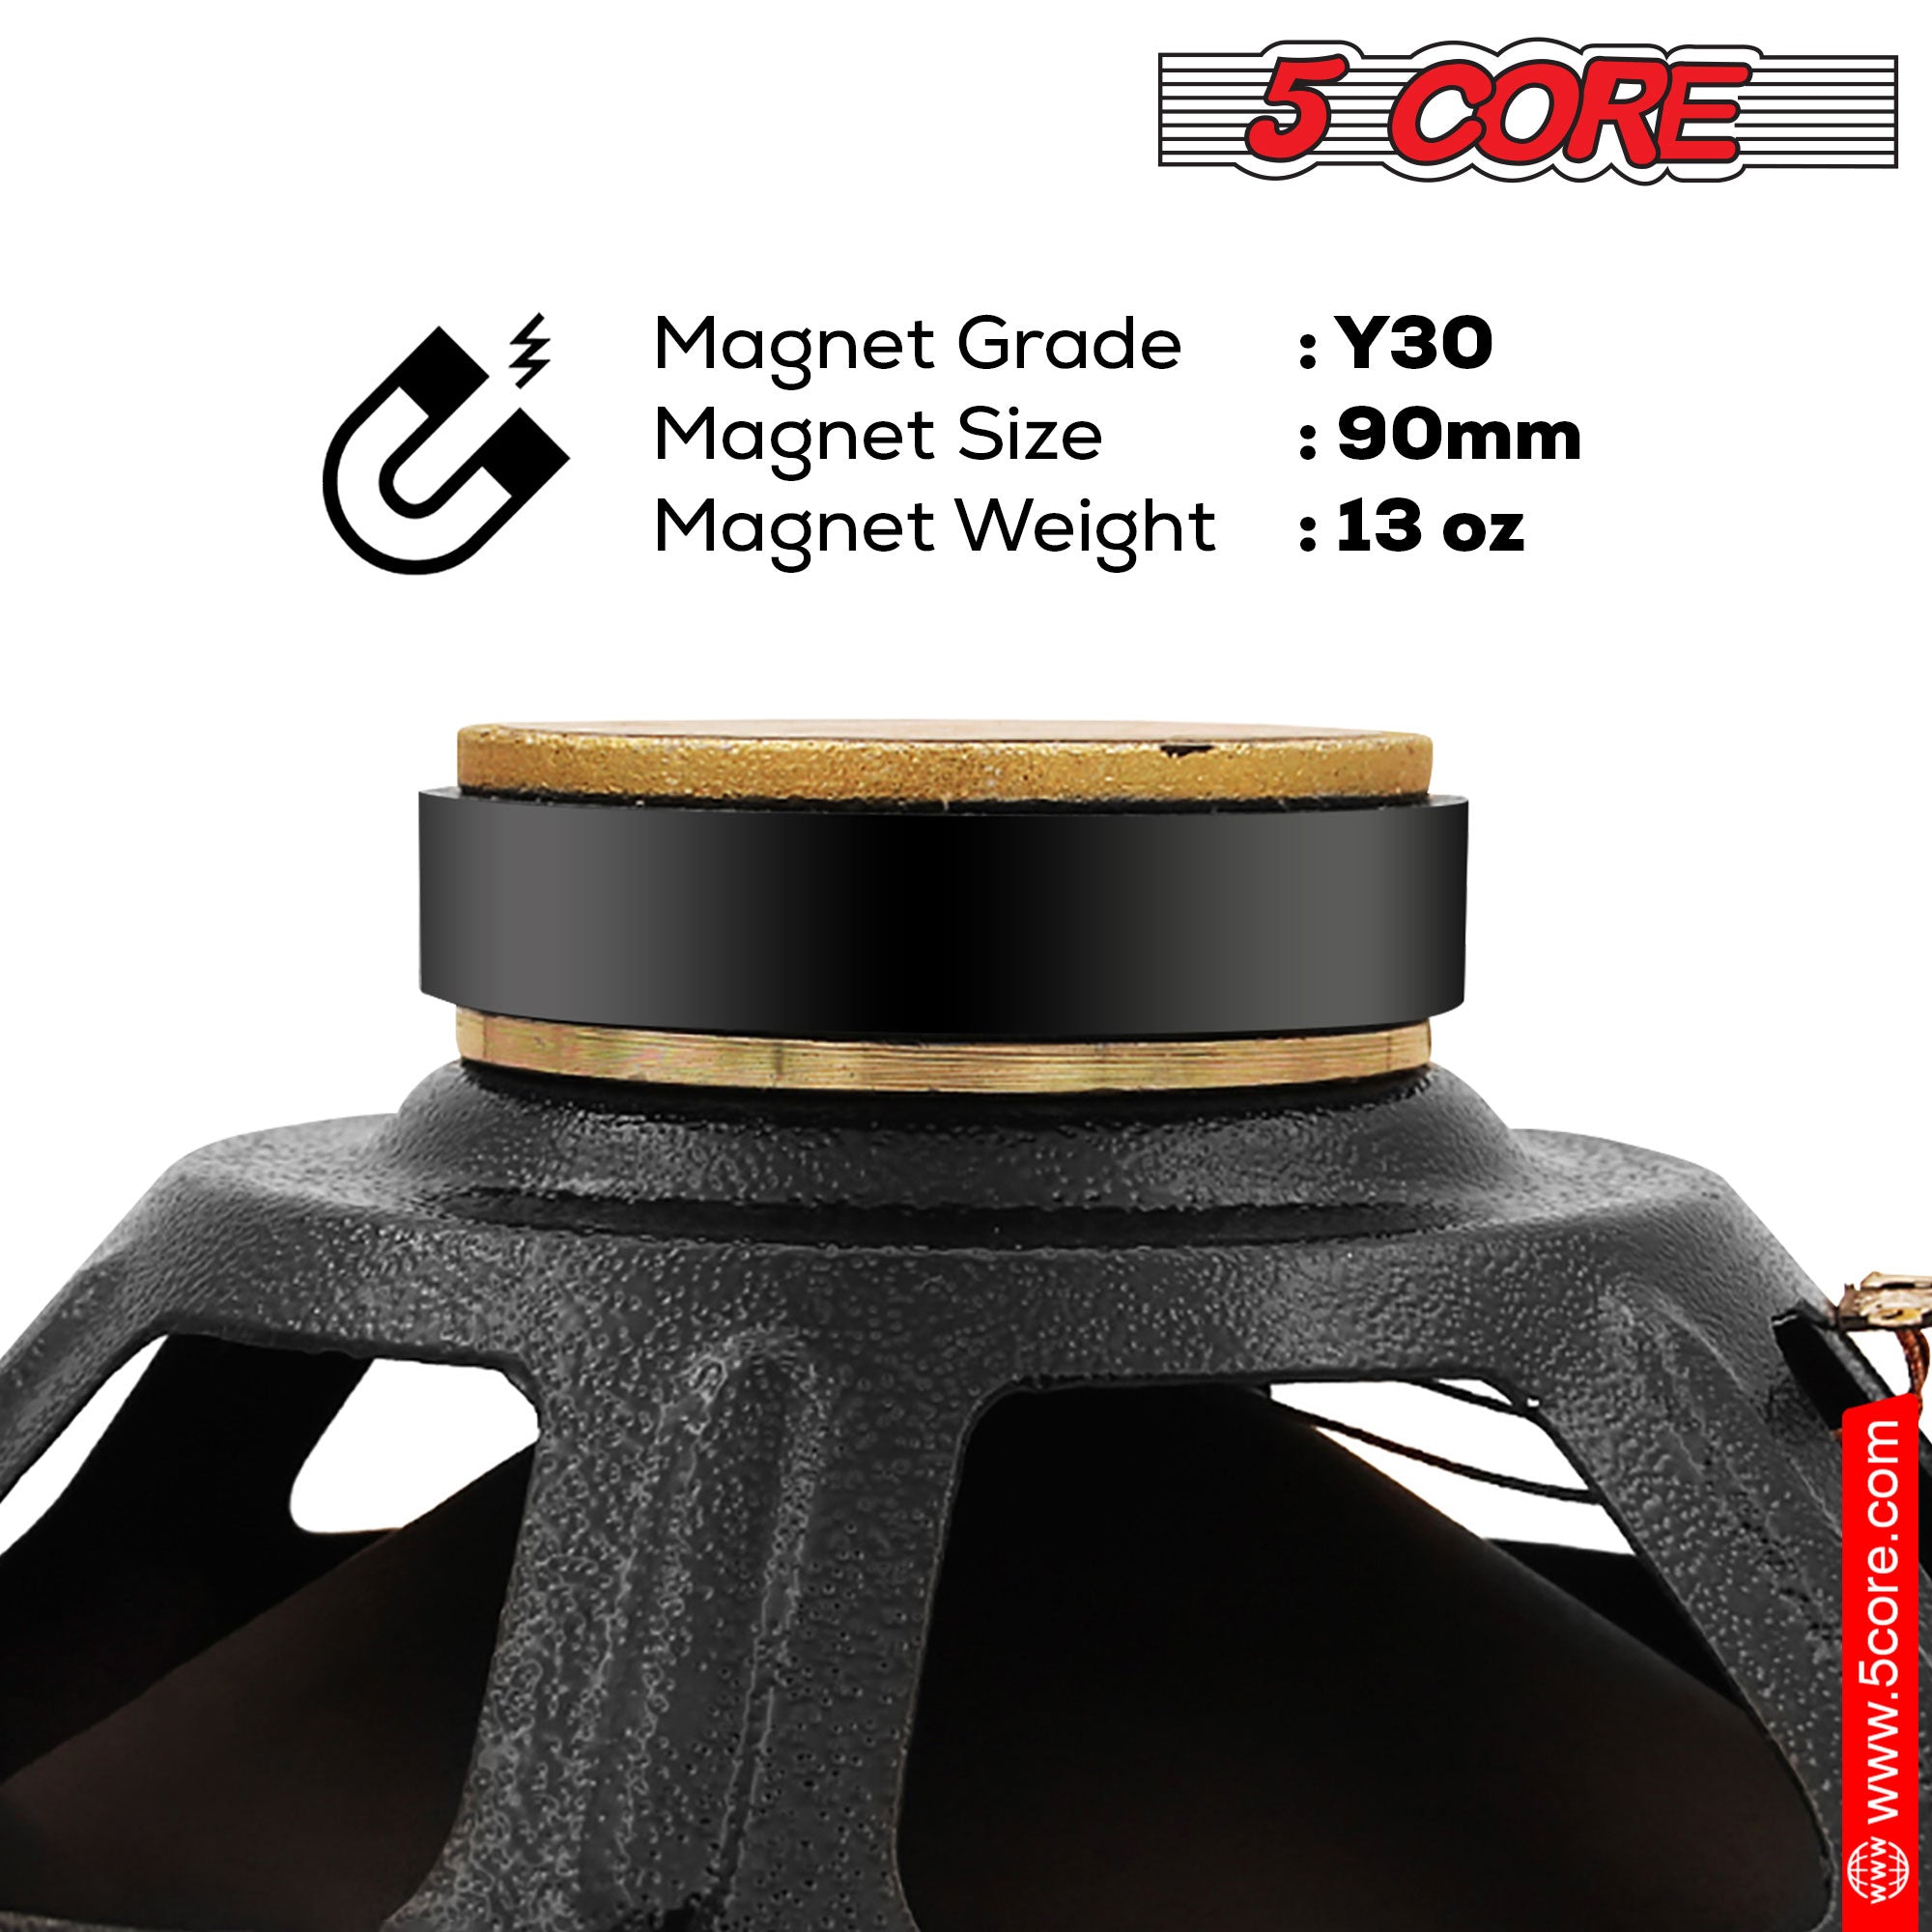 Achieve clear highs and tight lows – Y30 Magnet Grade, 90mm Magnet Size and 13 Oz magnet Weight for improved cone movements.